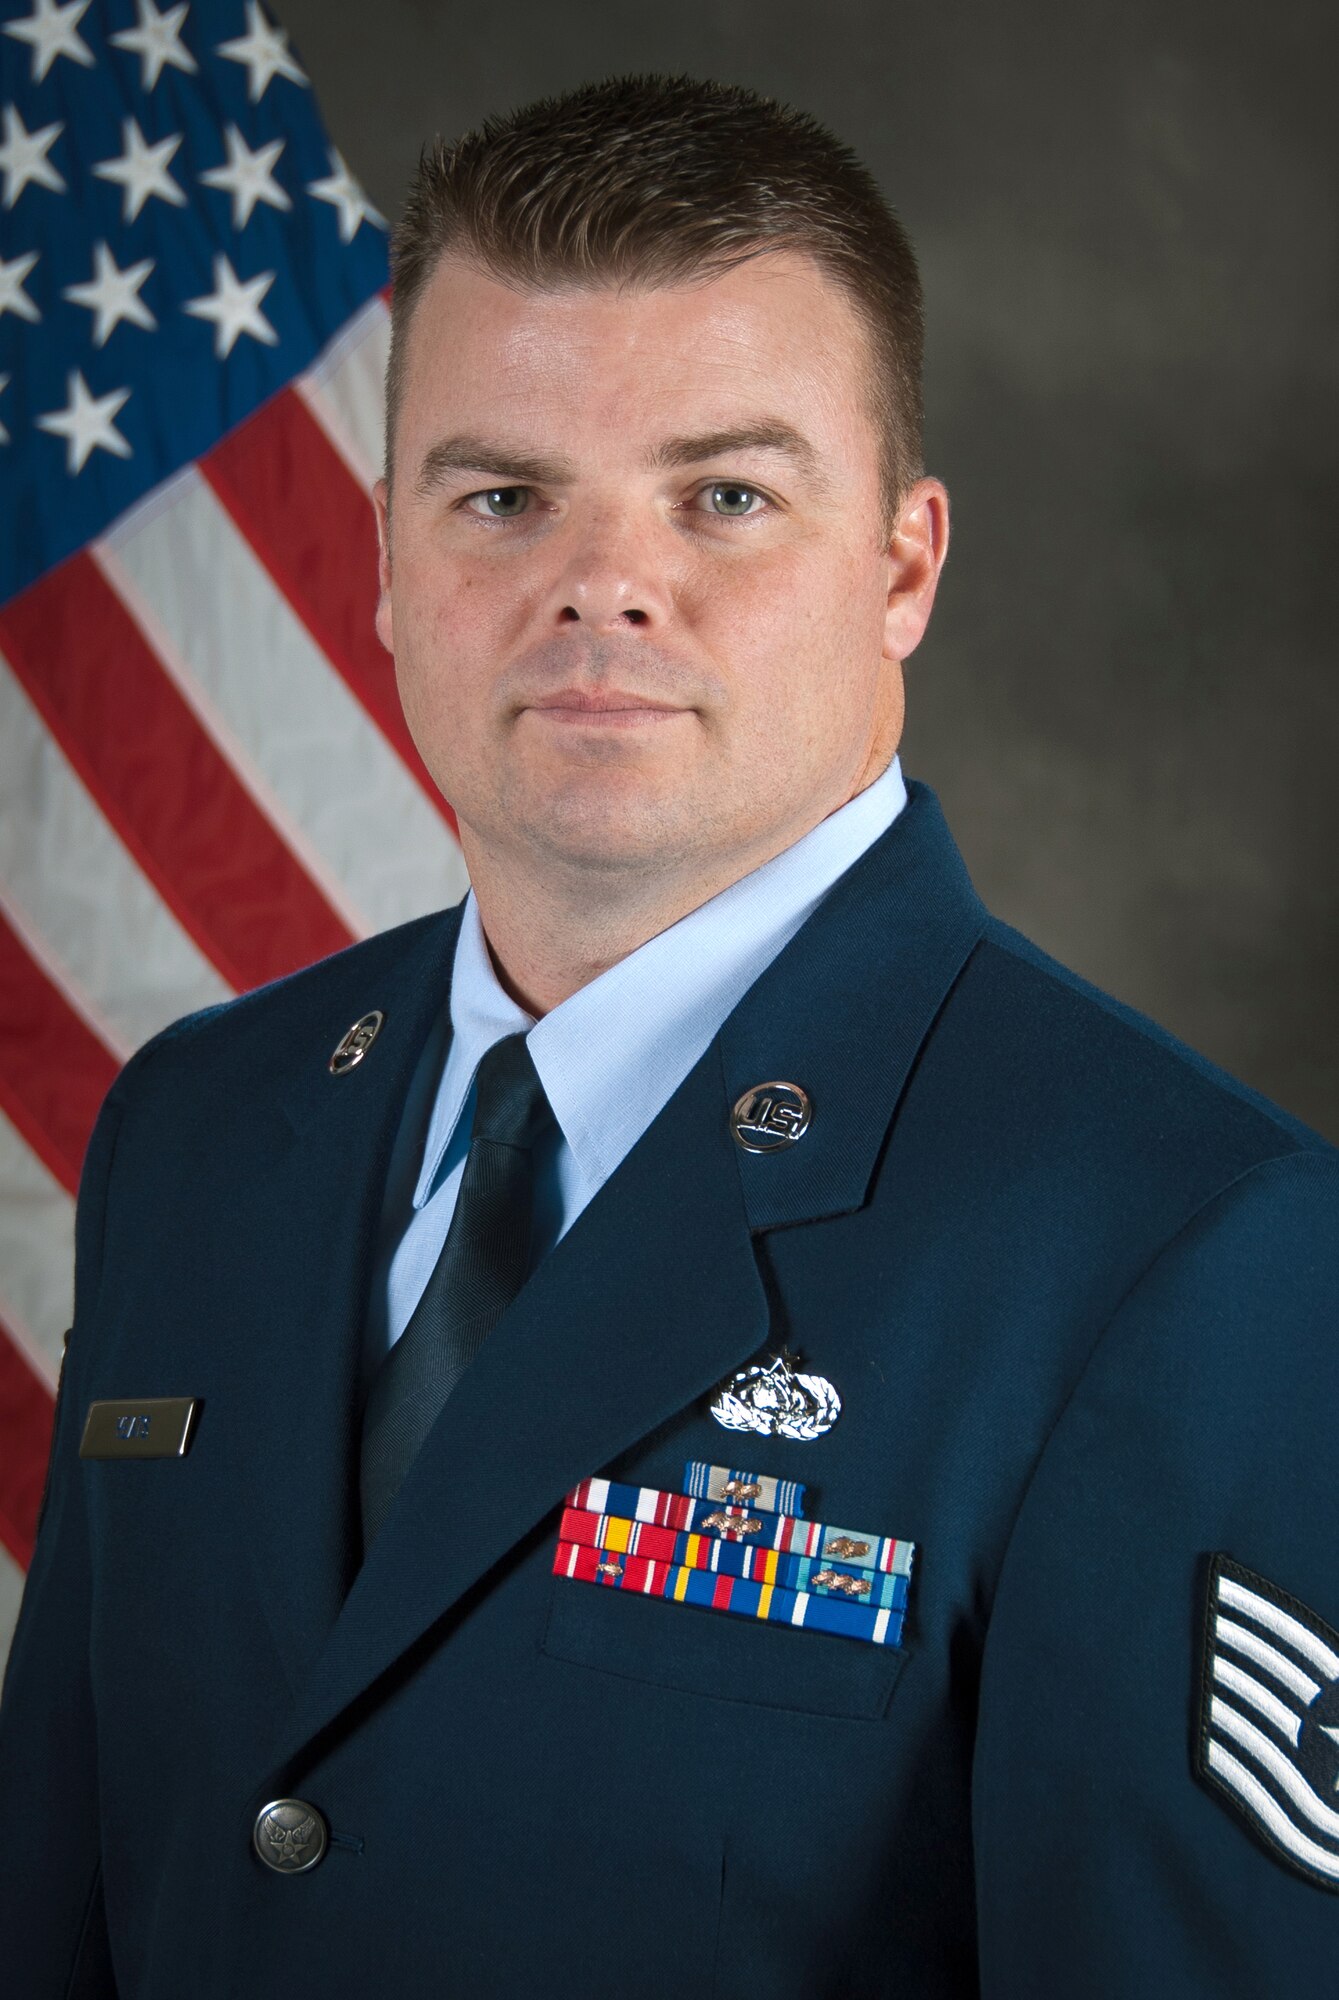 Tech. Sgt. Don A. Yeats, the Kentucky Air National Guard’s Non-Commissioned Officer of the Year for 2014, is a radio transmission systems specialist for the 123rd Special Tactics Squadron. During 2014, he led the development of a maritime communication system and repurposed communications suite that allows mission commanders to track and direct surface forces from airborne platforms. (U.S. Air National Guard photo by Master Sgt. Philip Speck)